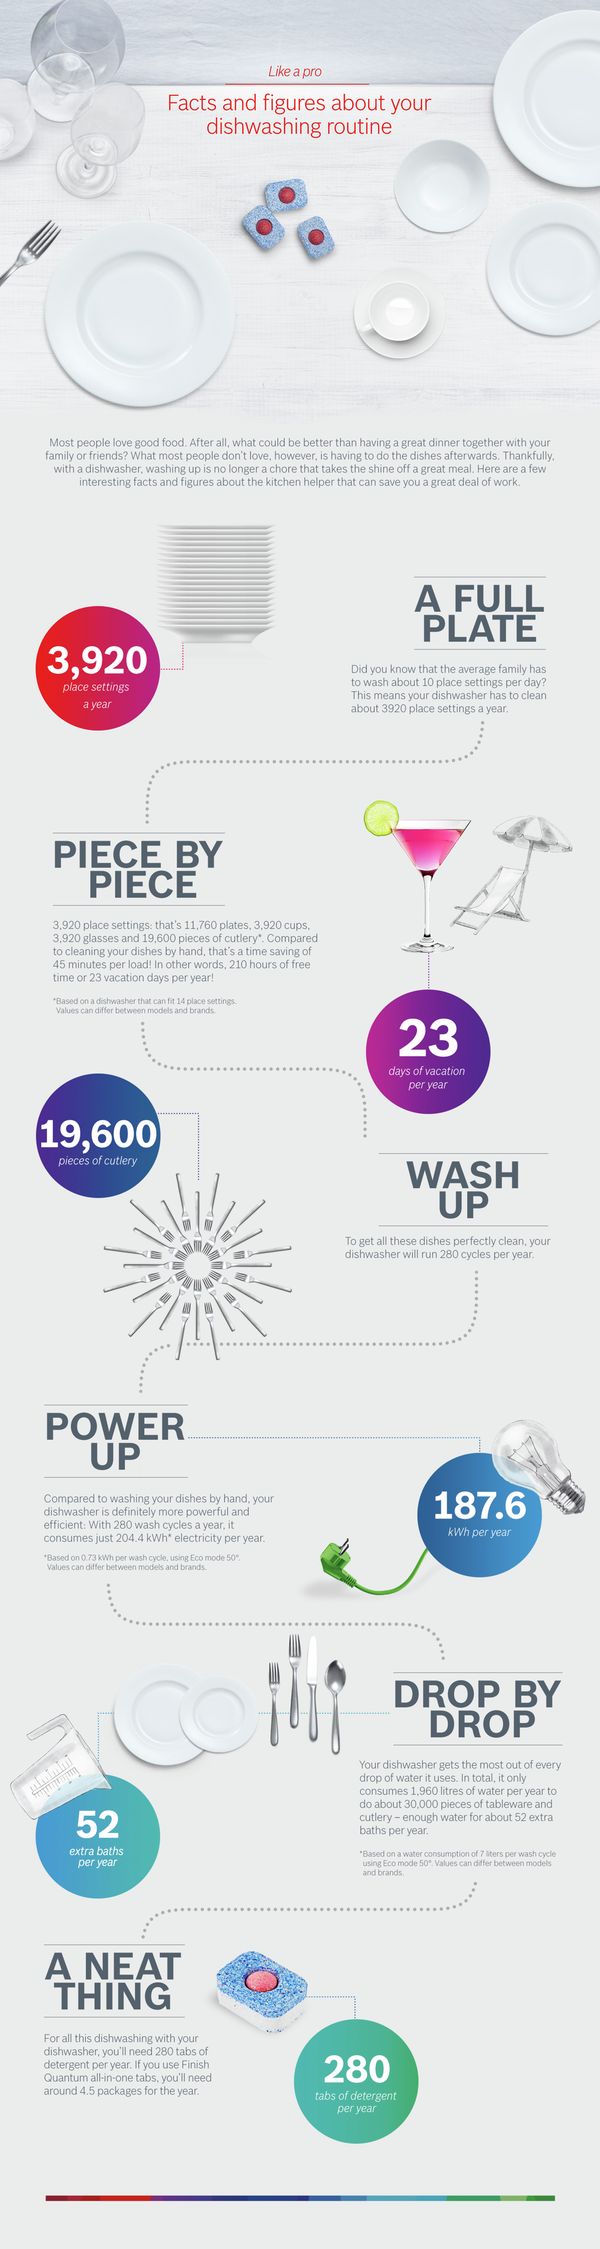 Facts & Figures About Your Dishwashing Routine